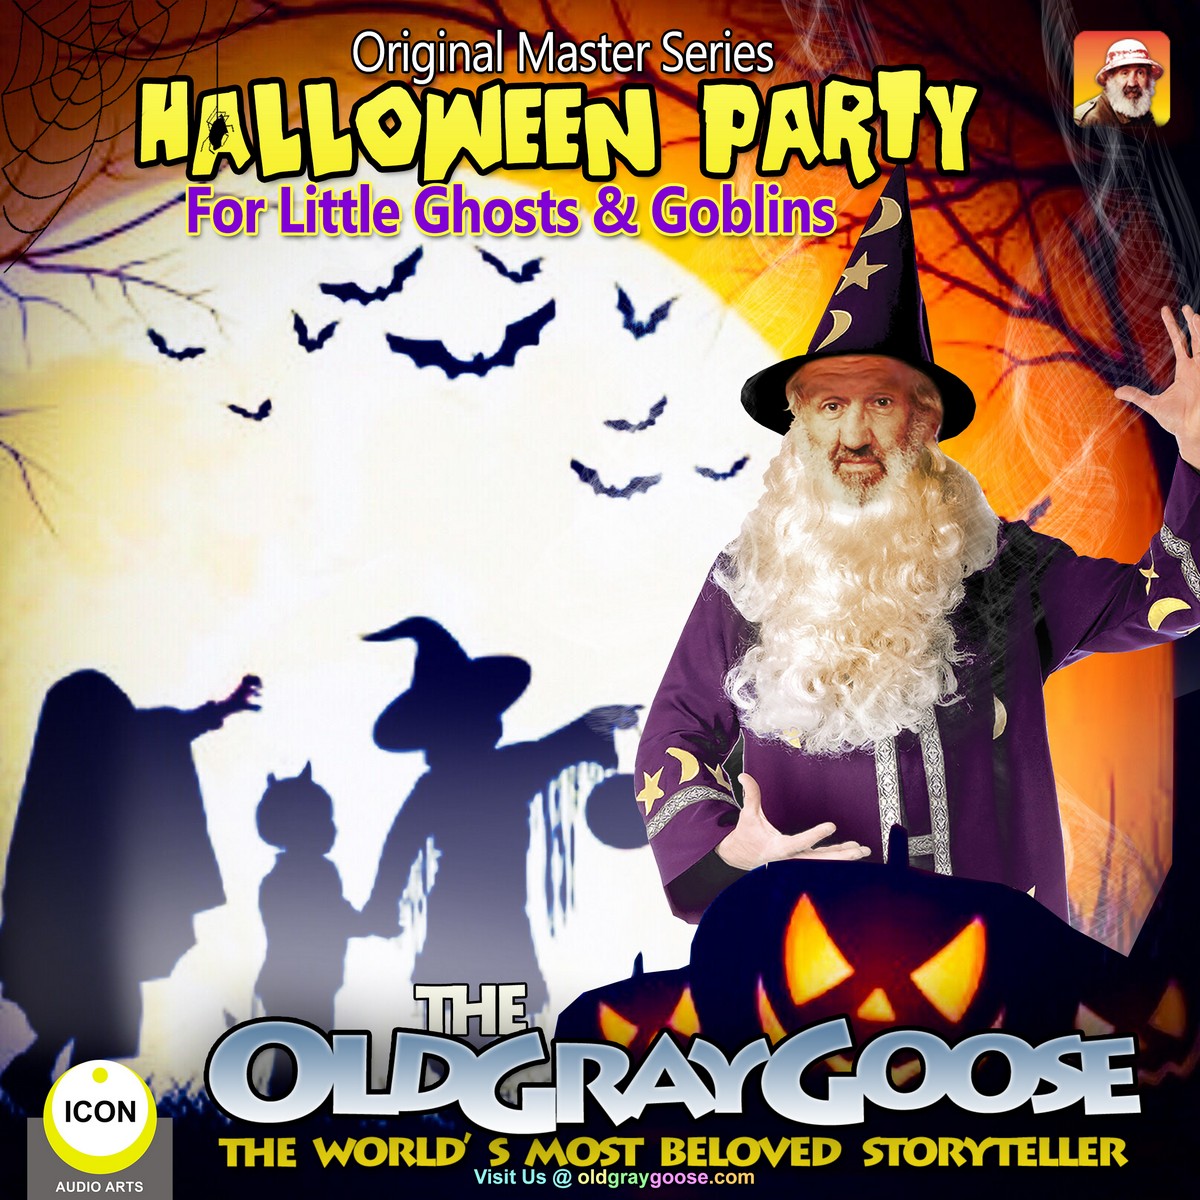 Halloween Party – For Little Ghosts & Goblins